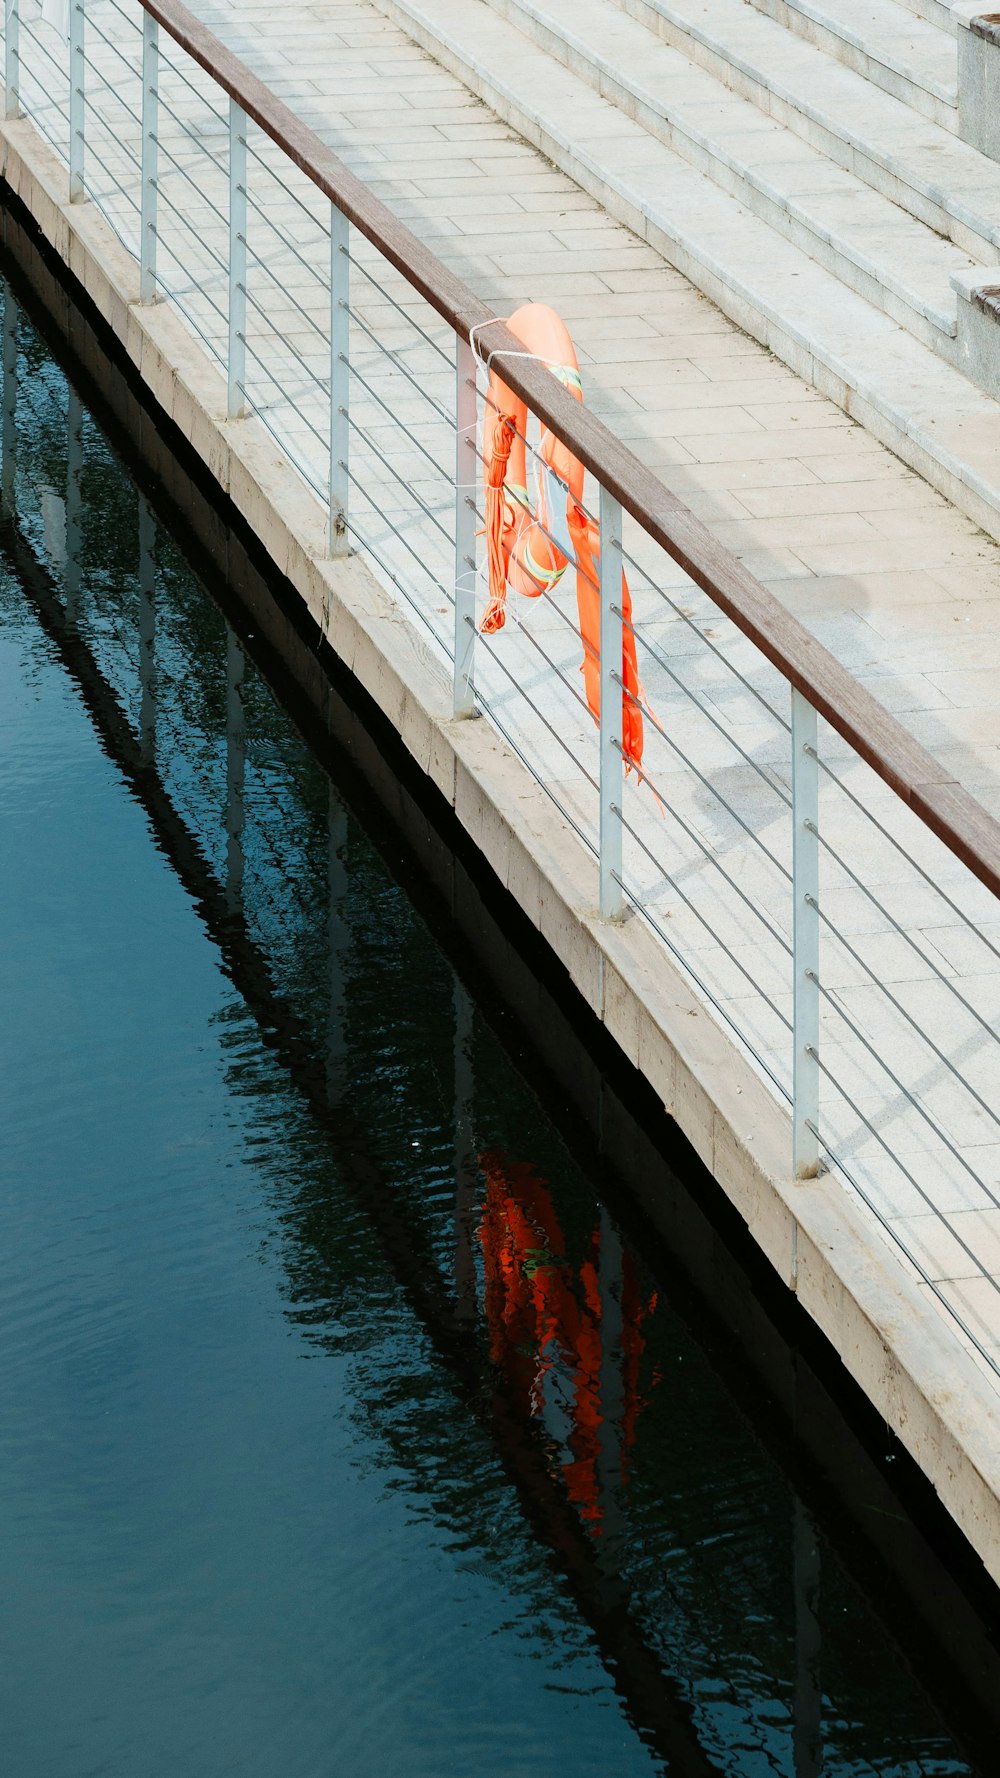 an orange flag is hanging on a railing over a body of water